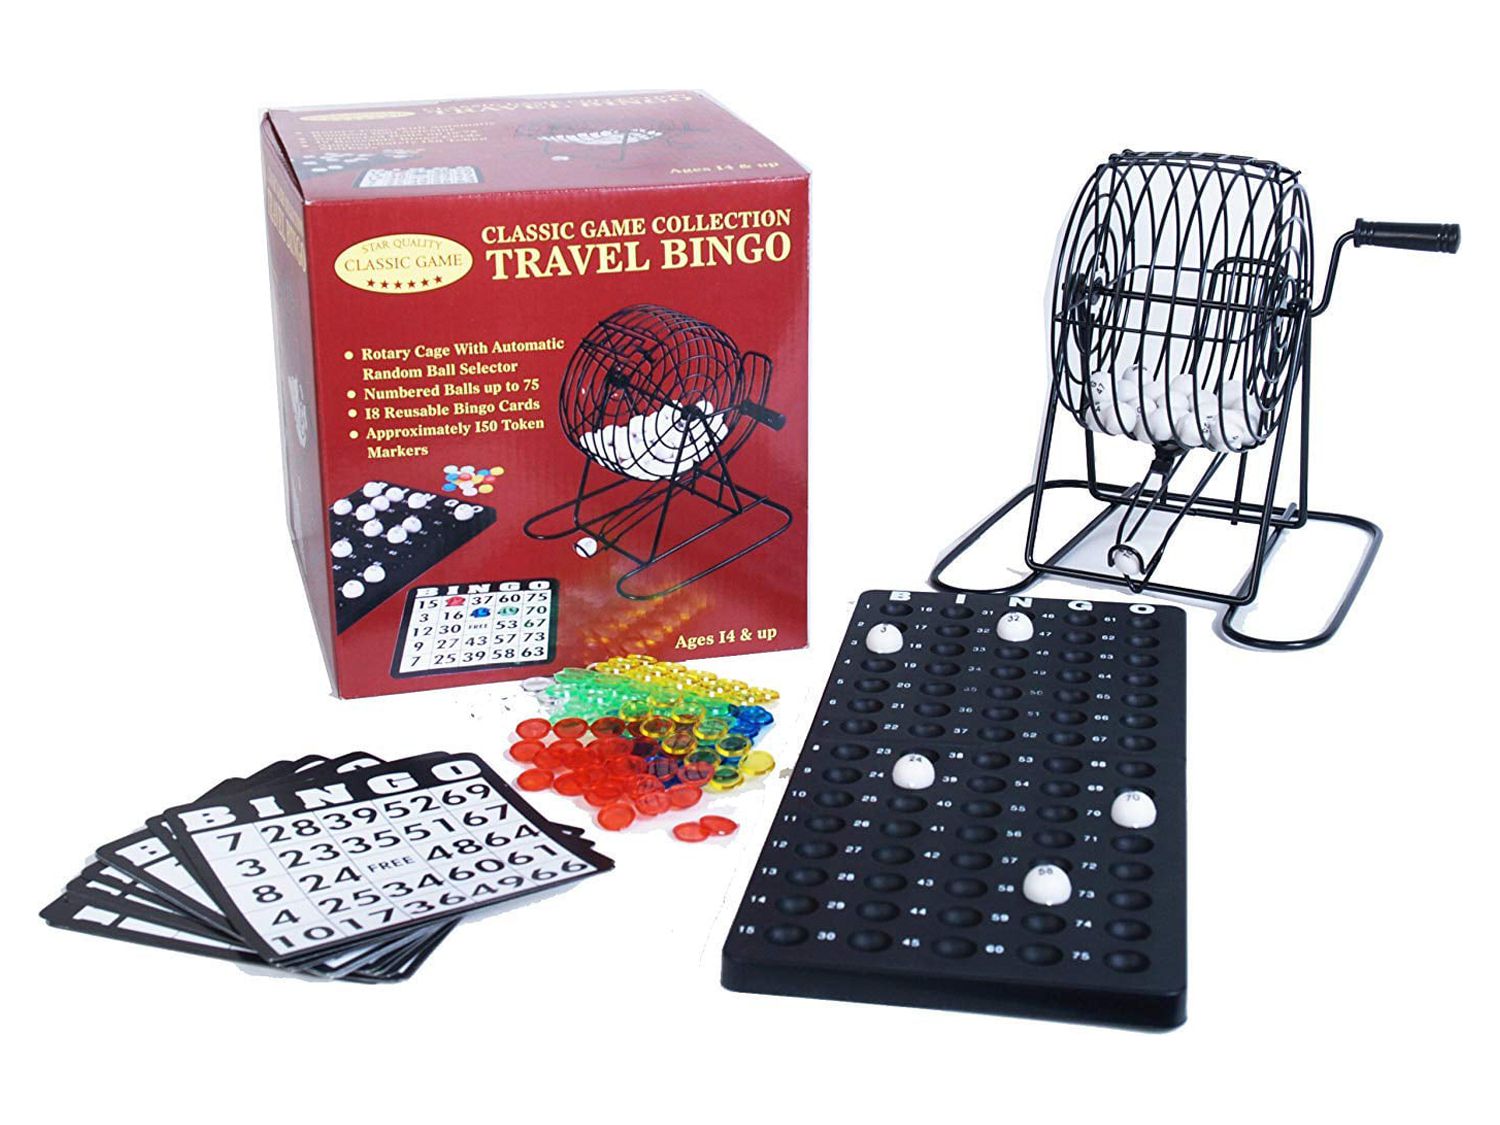 Classic Game Collection - Travel Bingo Set - image 2 of 2